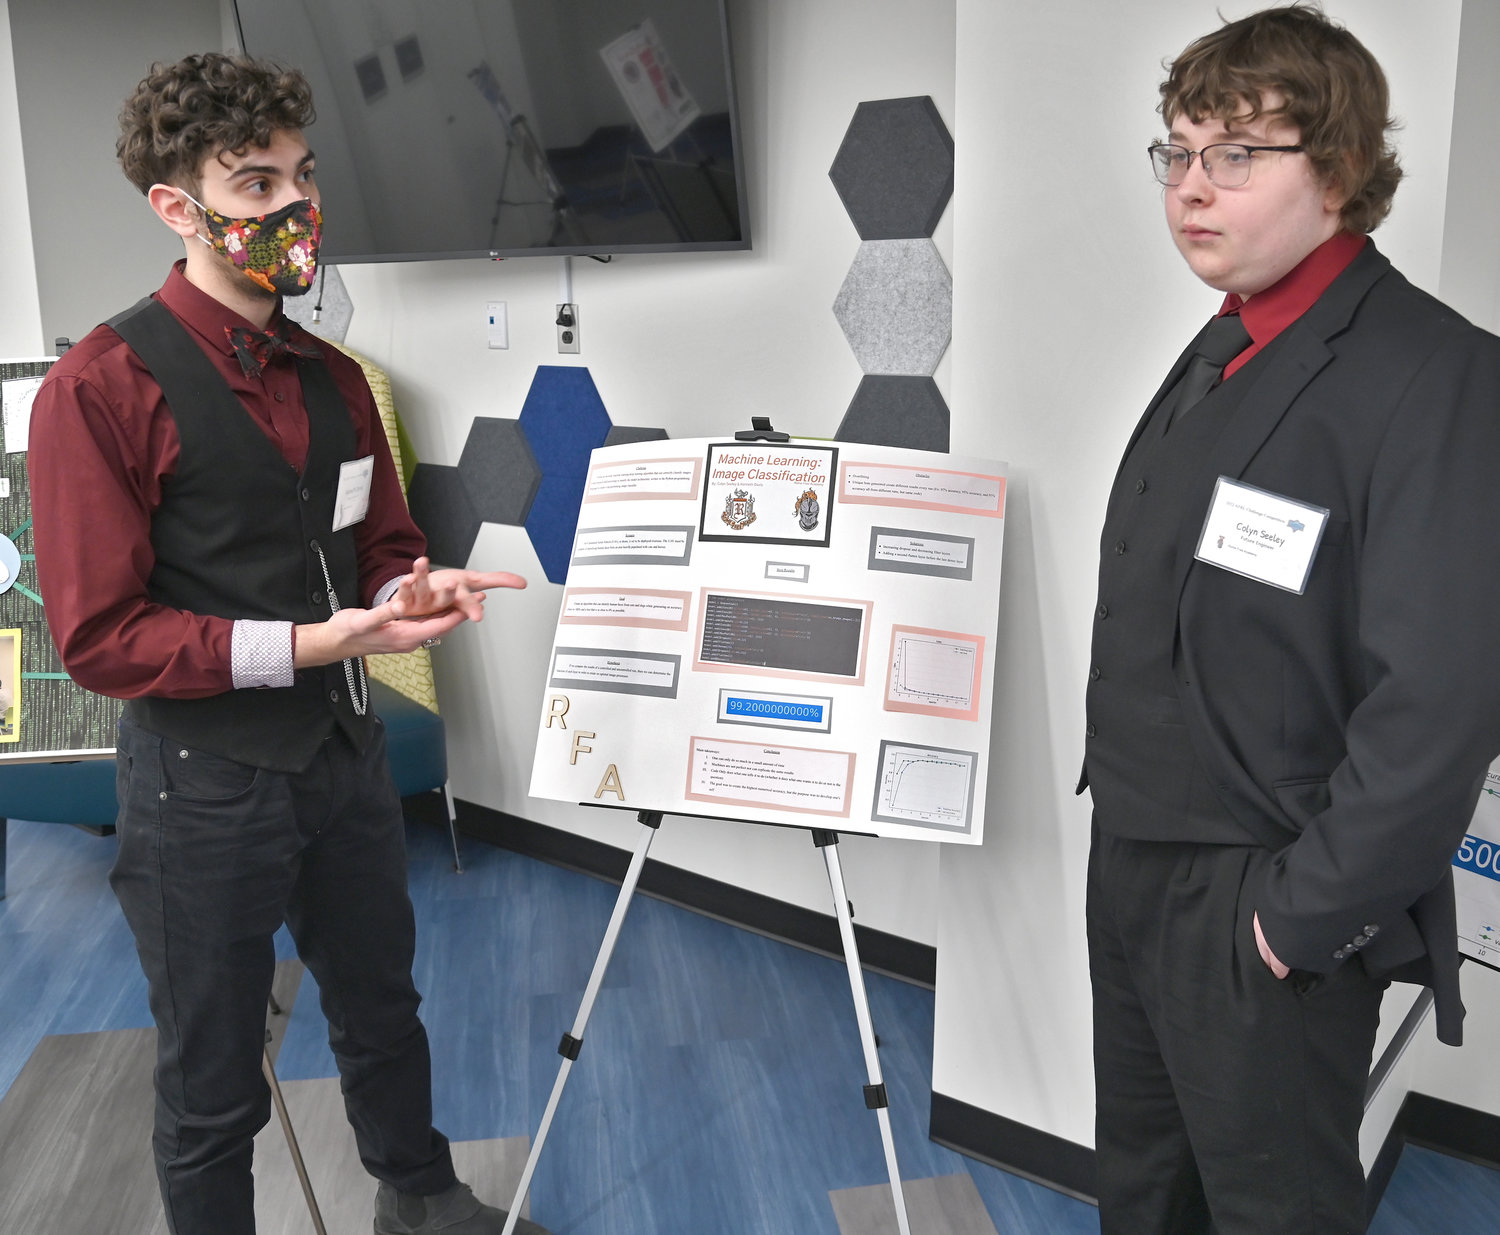 RFA juniors Kenneth W. Davis and Colyn T. Seeley talk about their poster and the project they worked on this past week at the STEM event at Innovare.